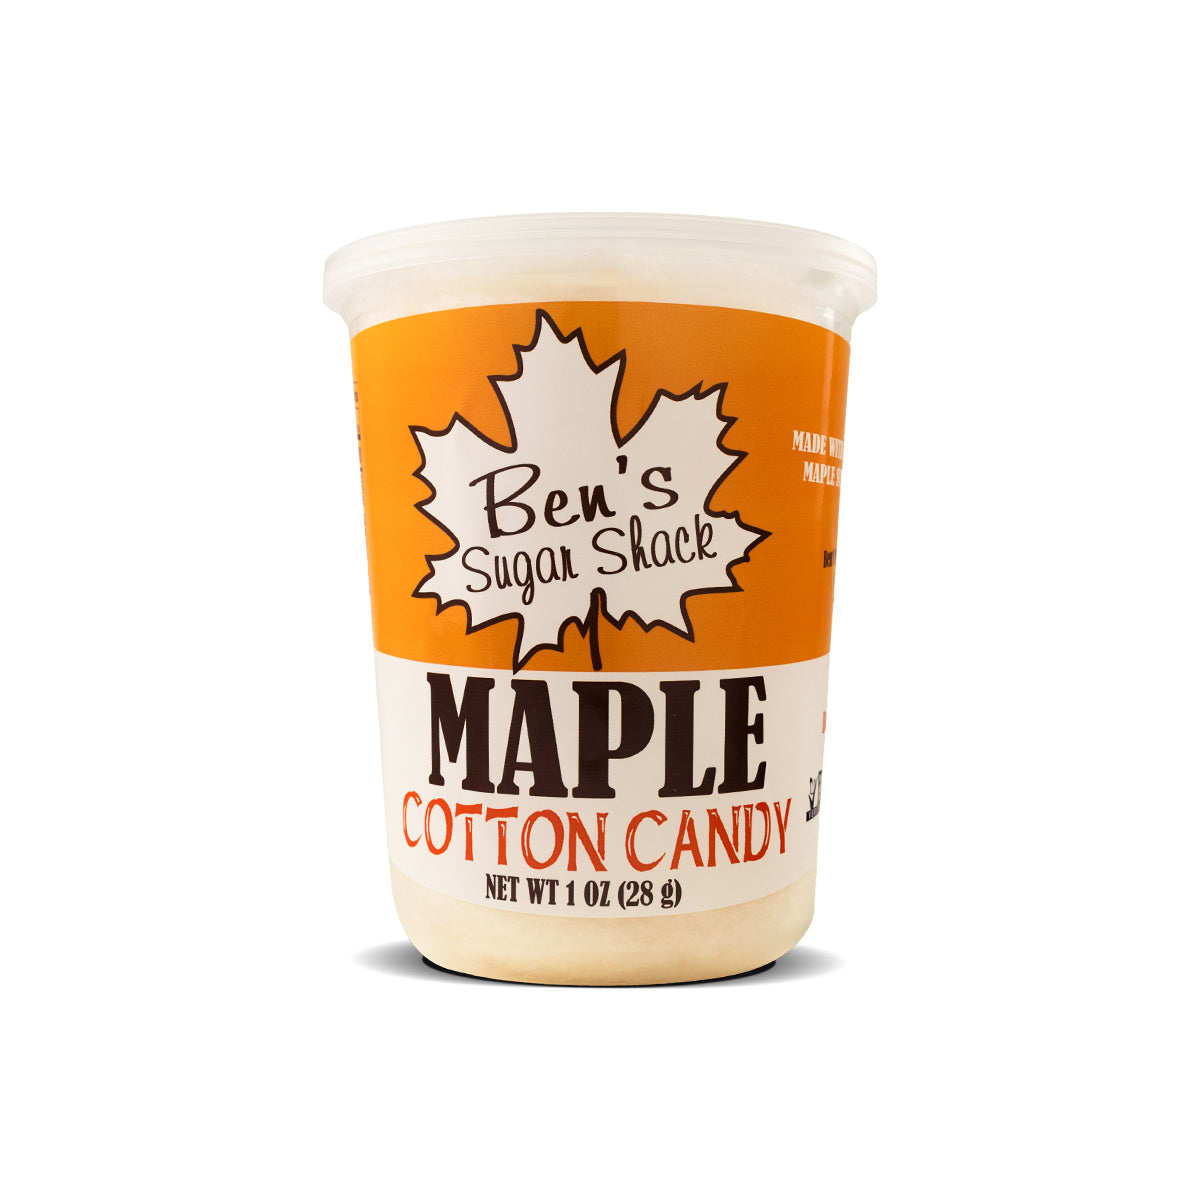 Maple Cotton Candy - Bens Sugar Shack – Bens Maple Syrup